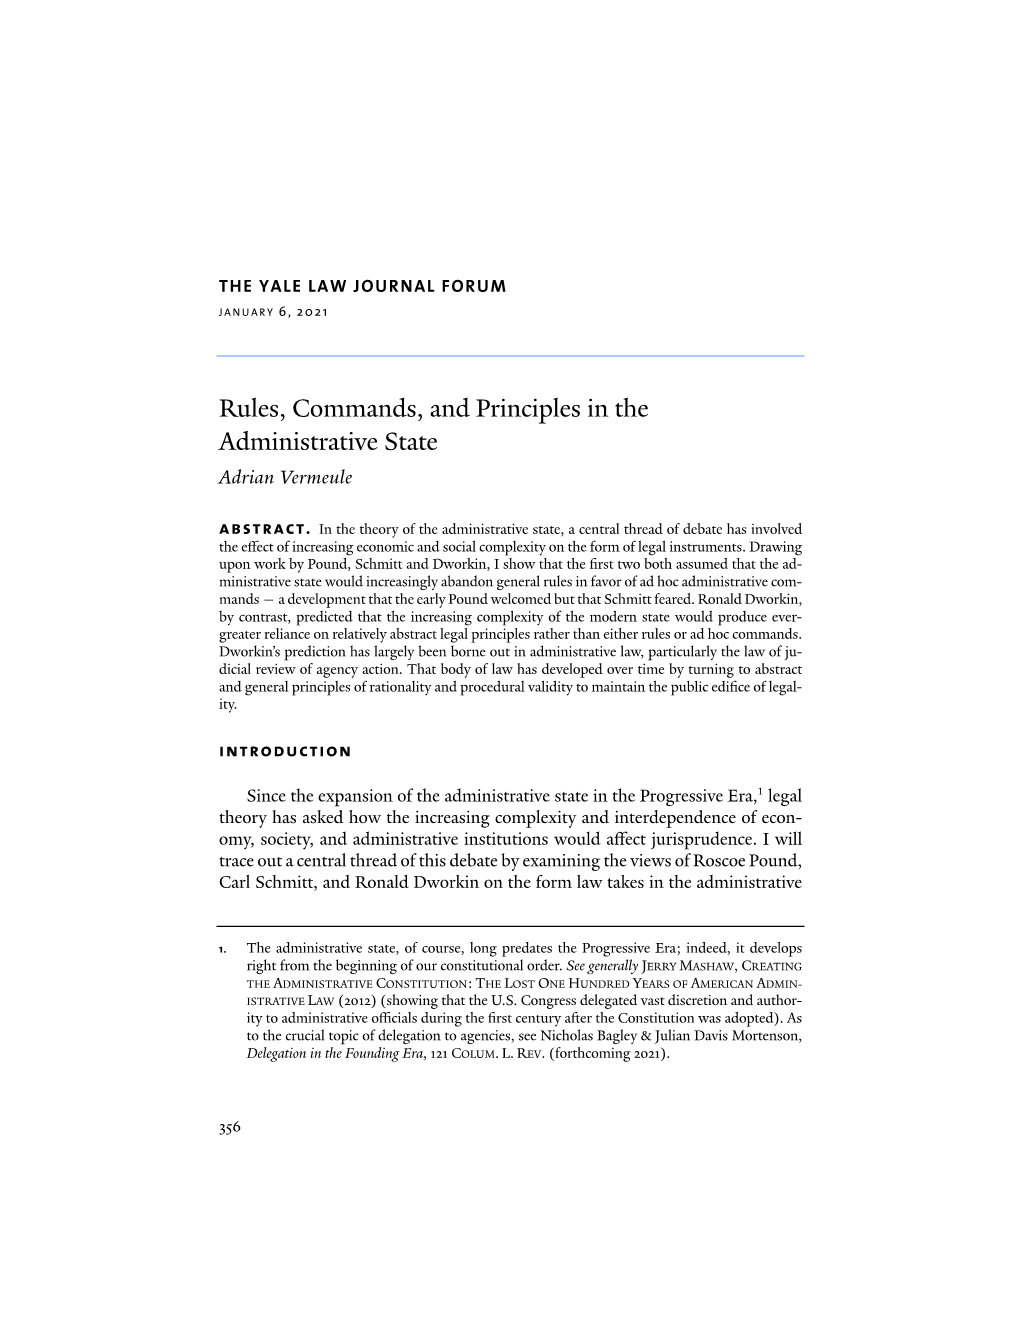 Rules, Commands, and Principles in the Administrative State Adrian Vermeule Abstract